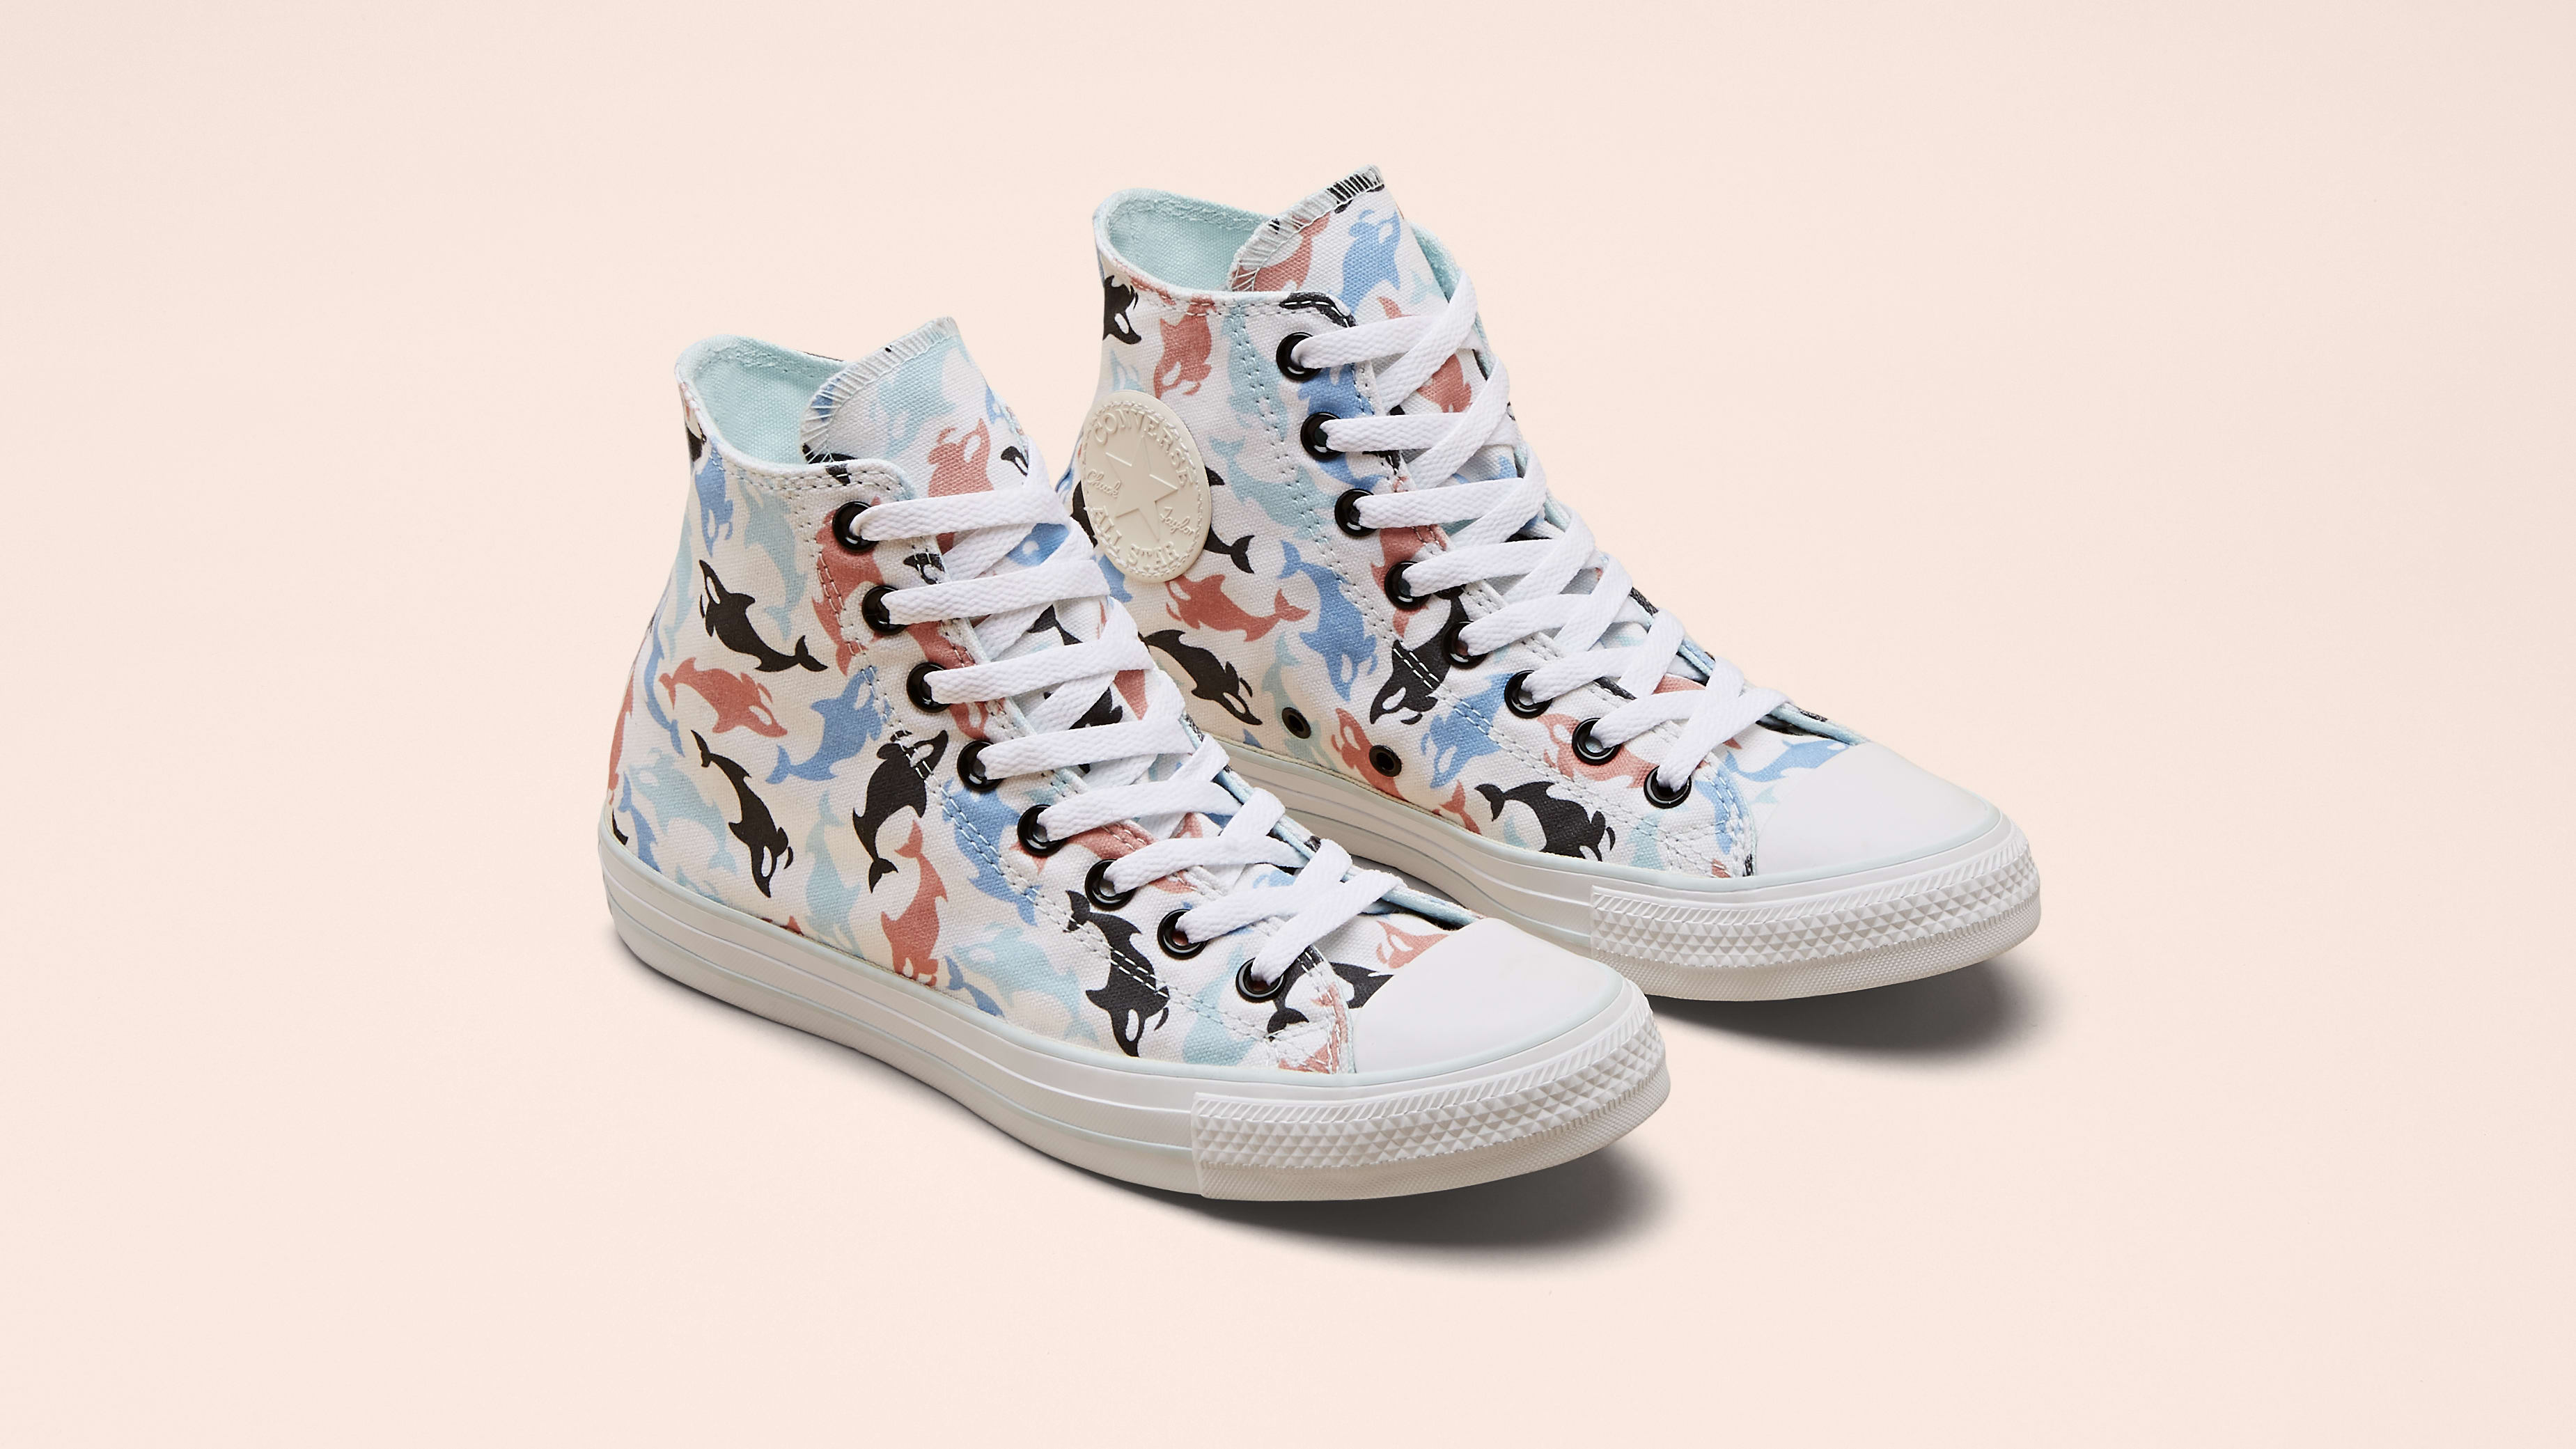 Millie Bobby Brown x Converse &#x27;Millie By You&#x27; 8